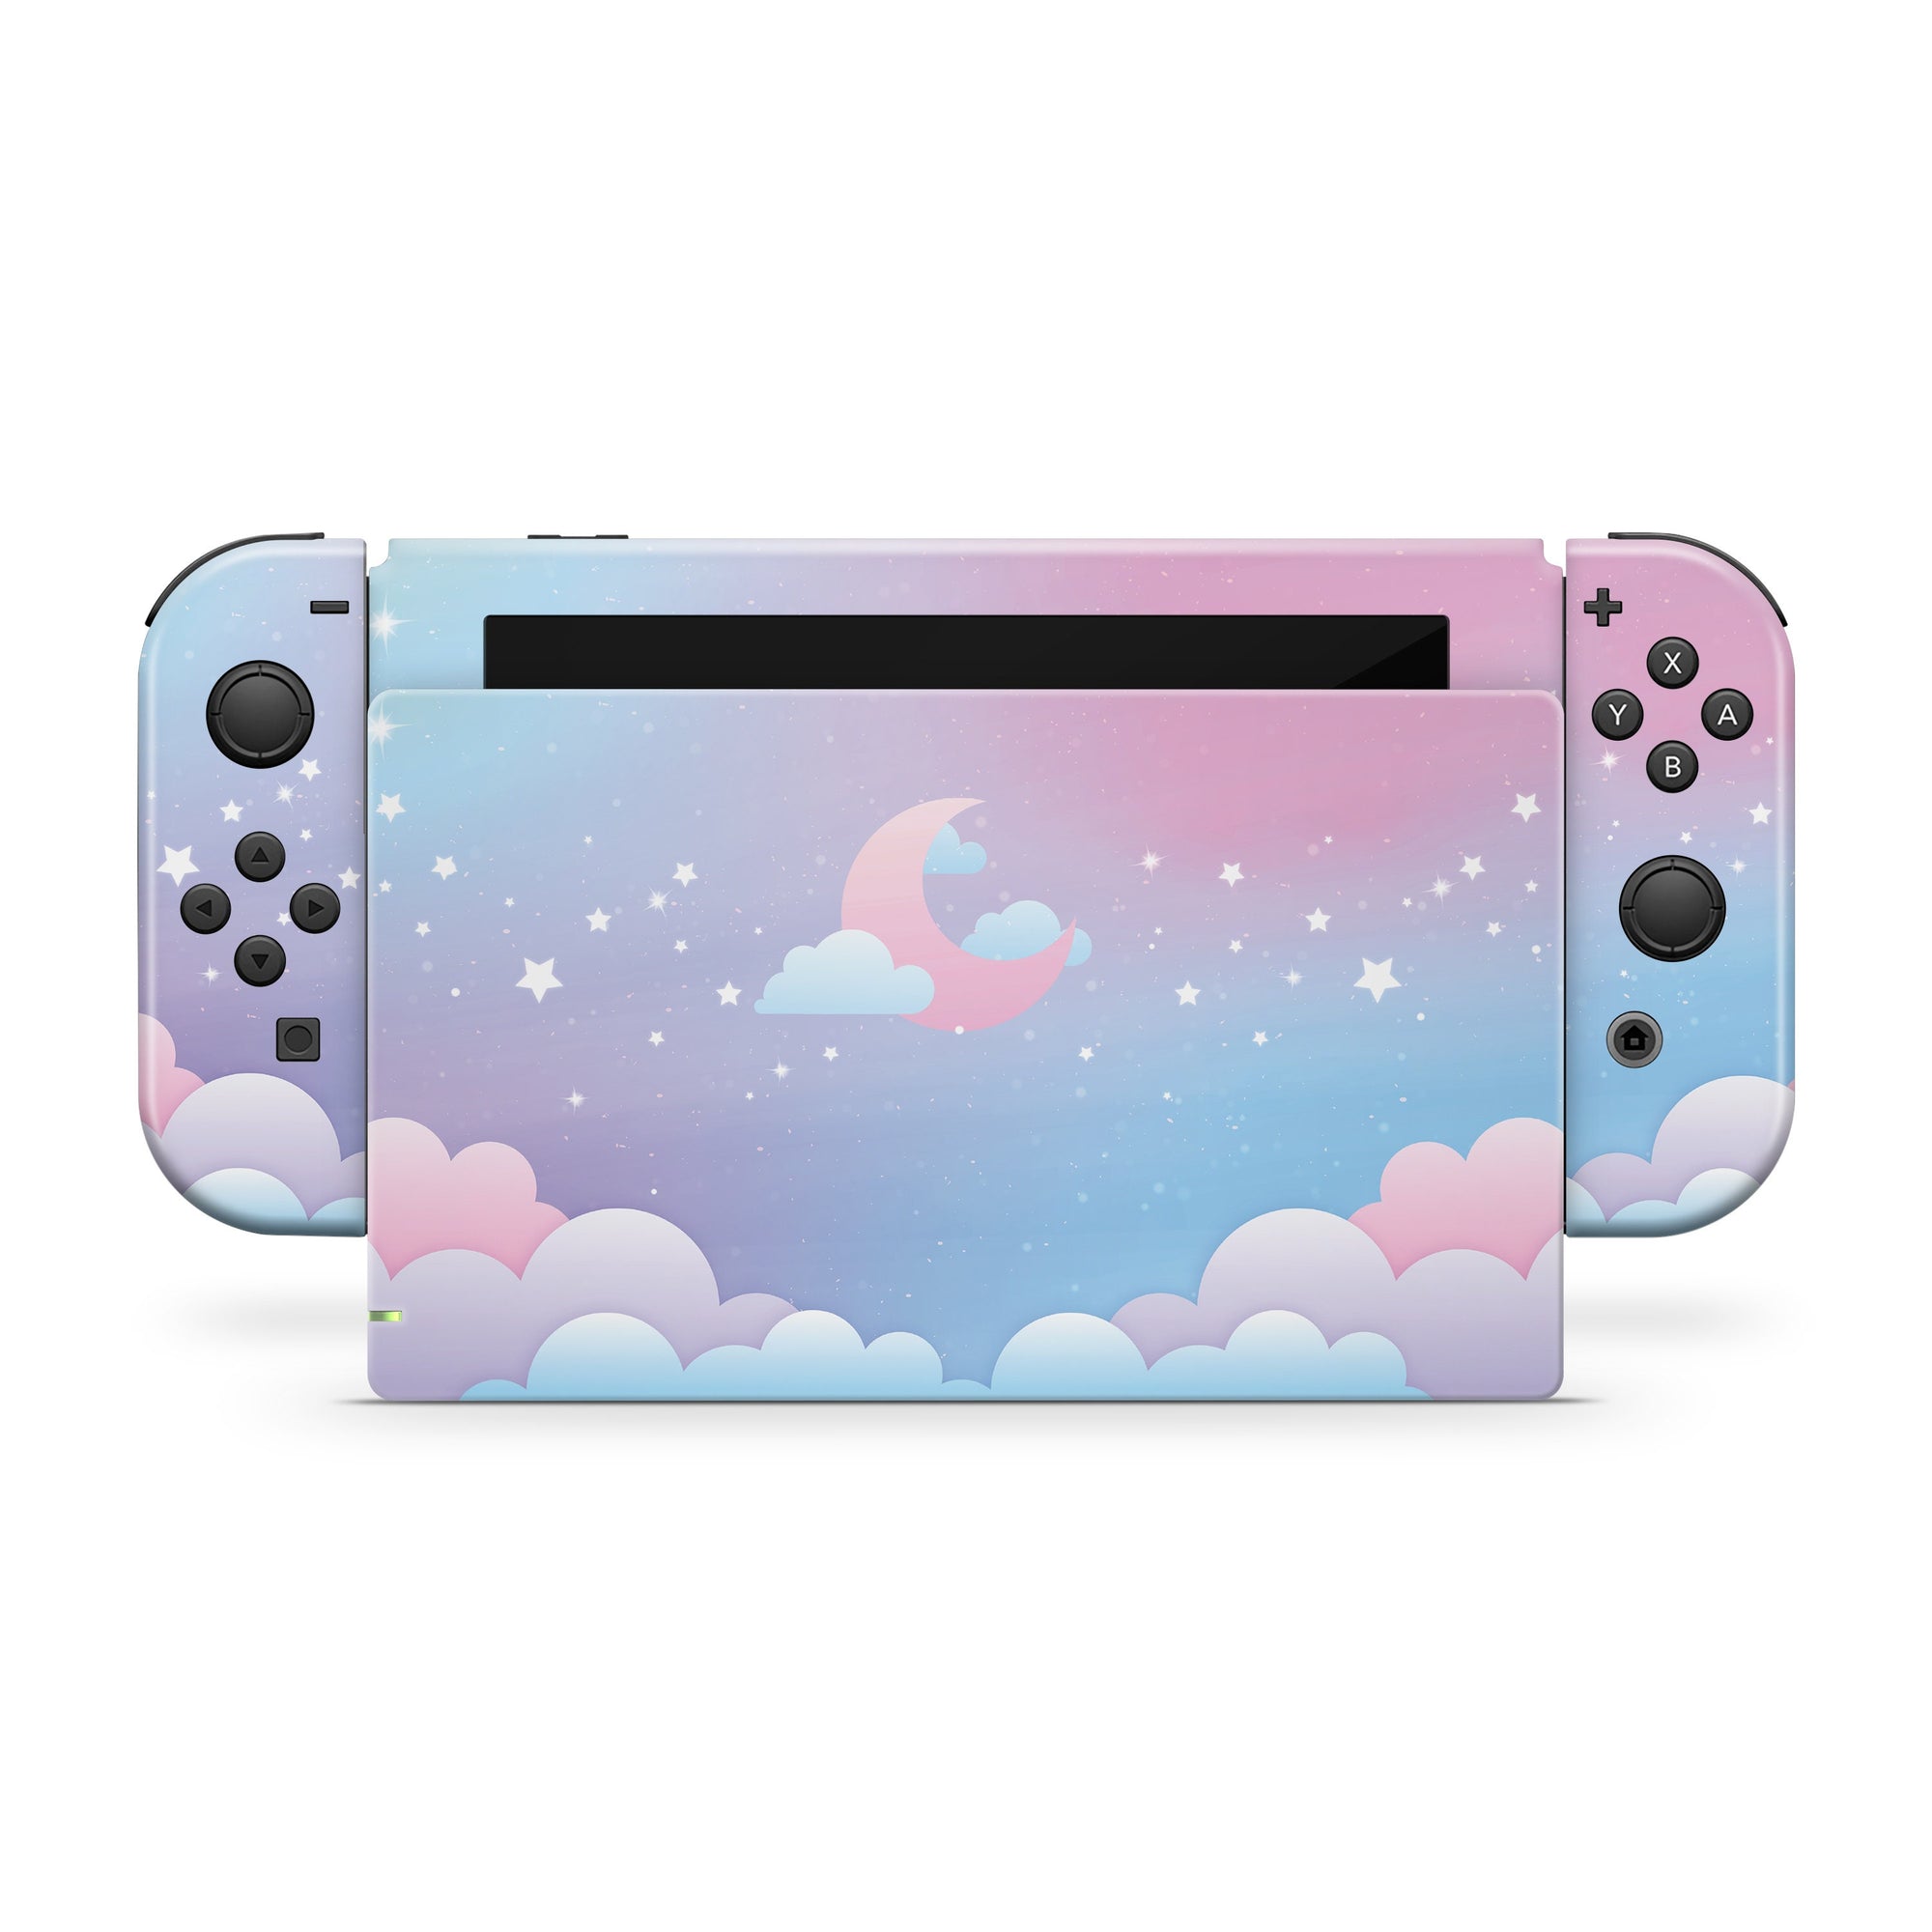 nintendo switches skin Moon, Blue Clouds switch skin Starry Sky Full wrap 3m